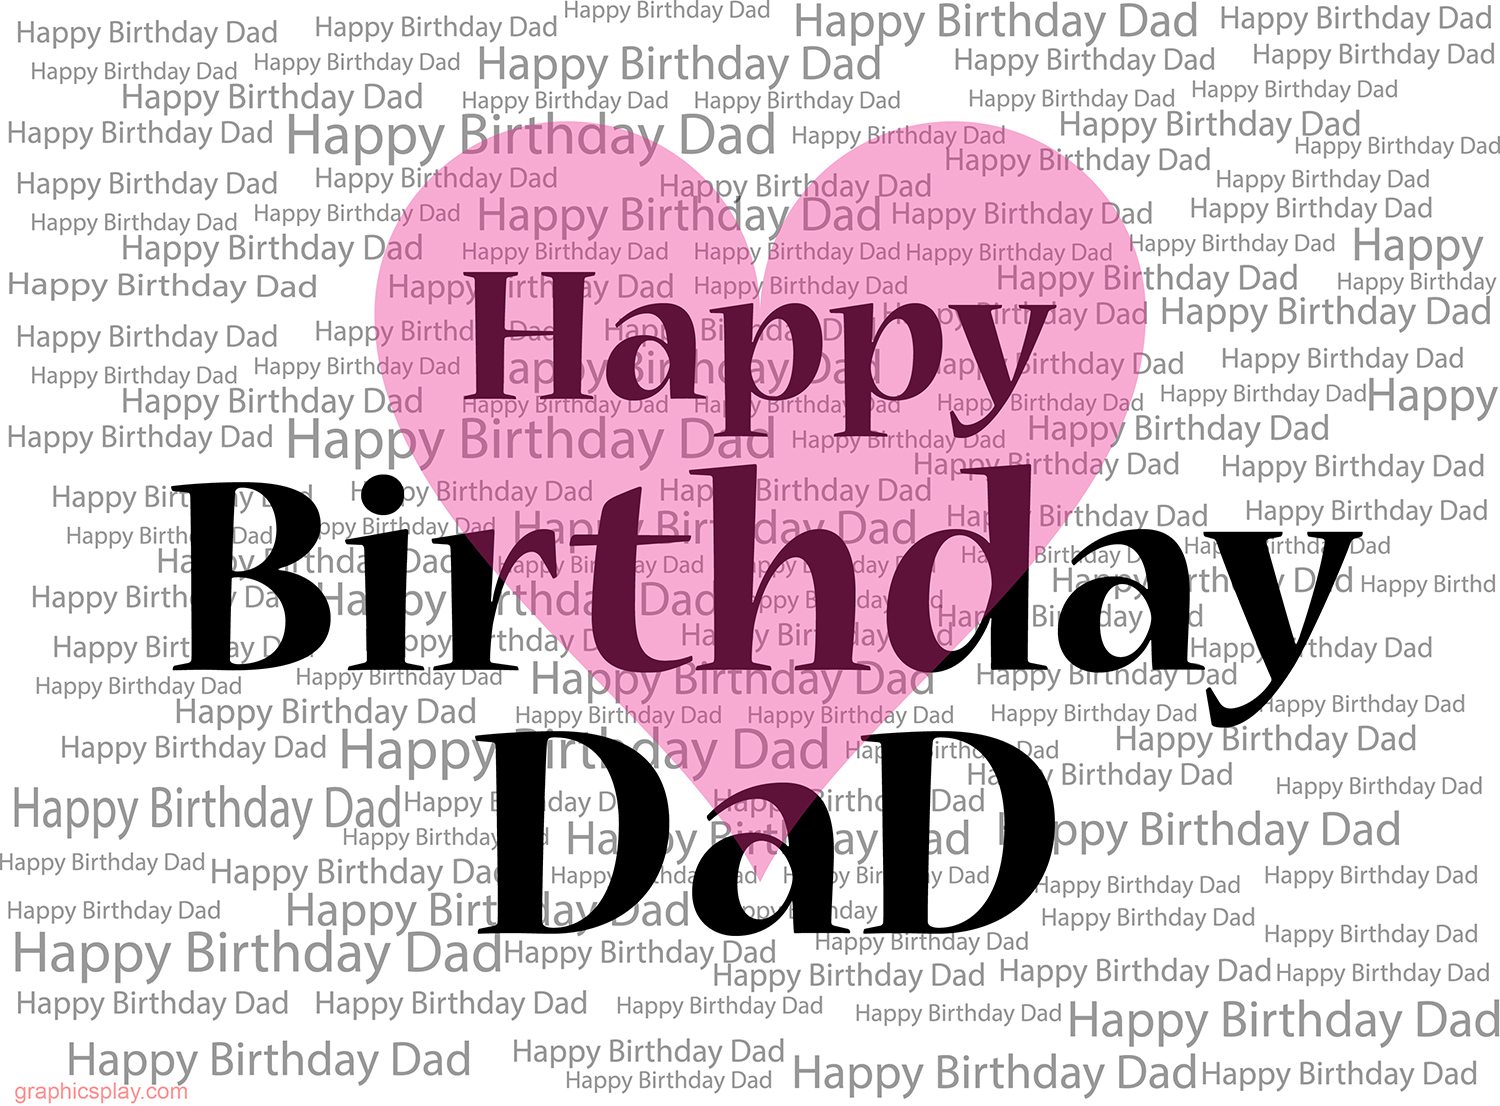 Happy Birthday Dad Greeting with Love.